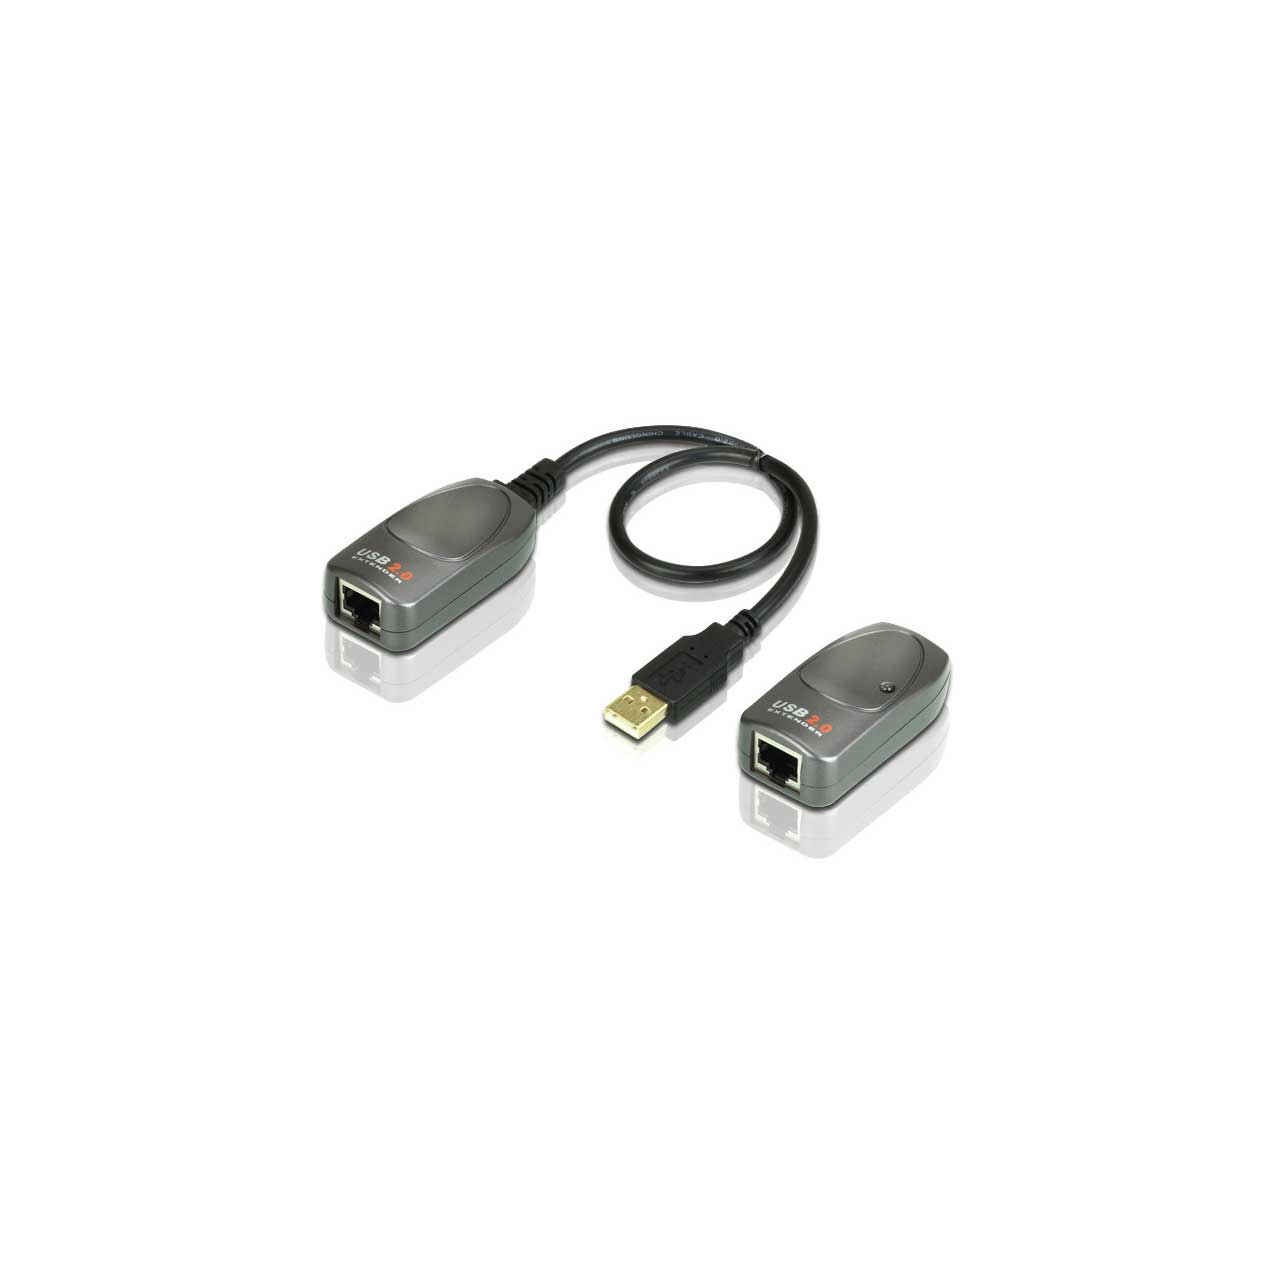 USB 2.0 Cat5 60 Meter Extension Cable